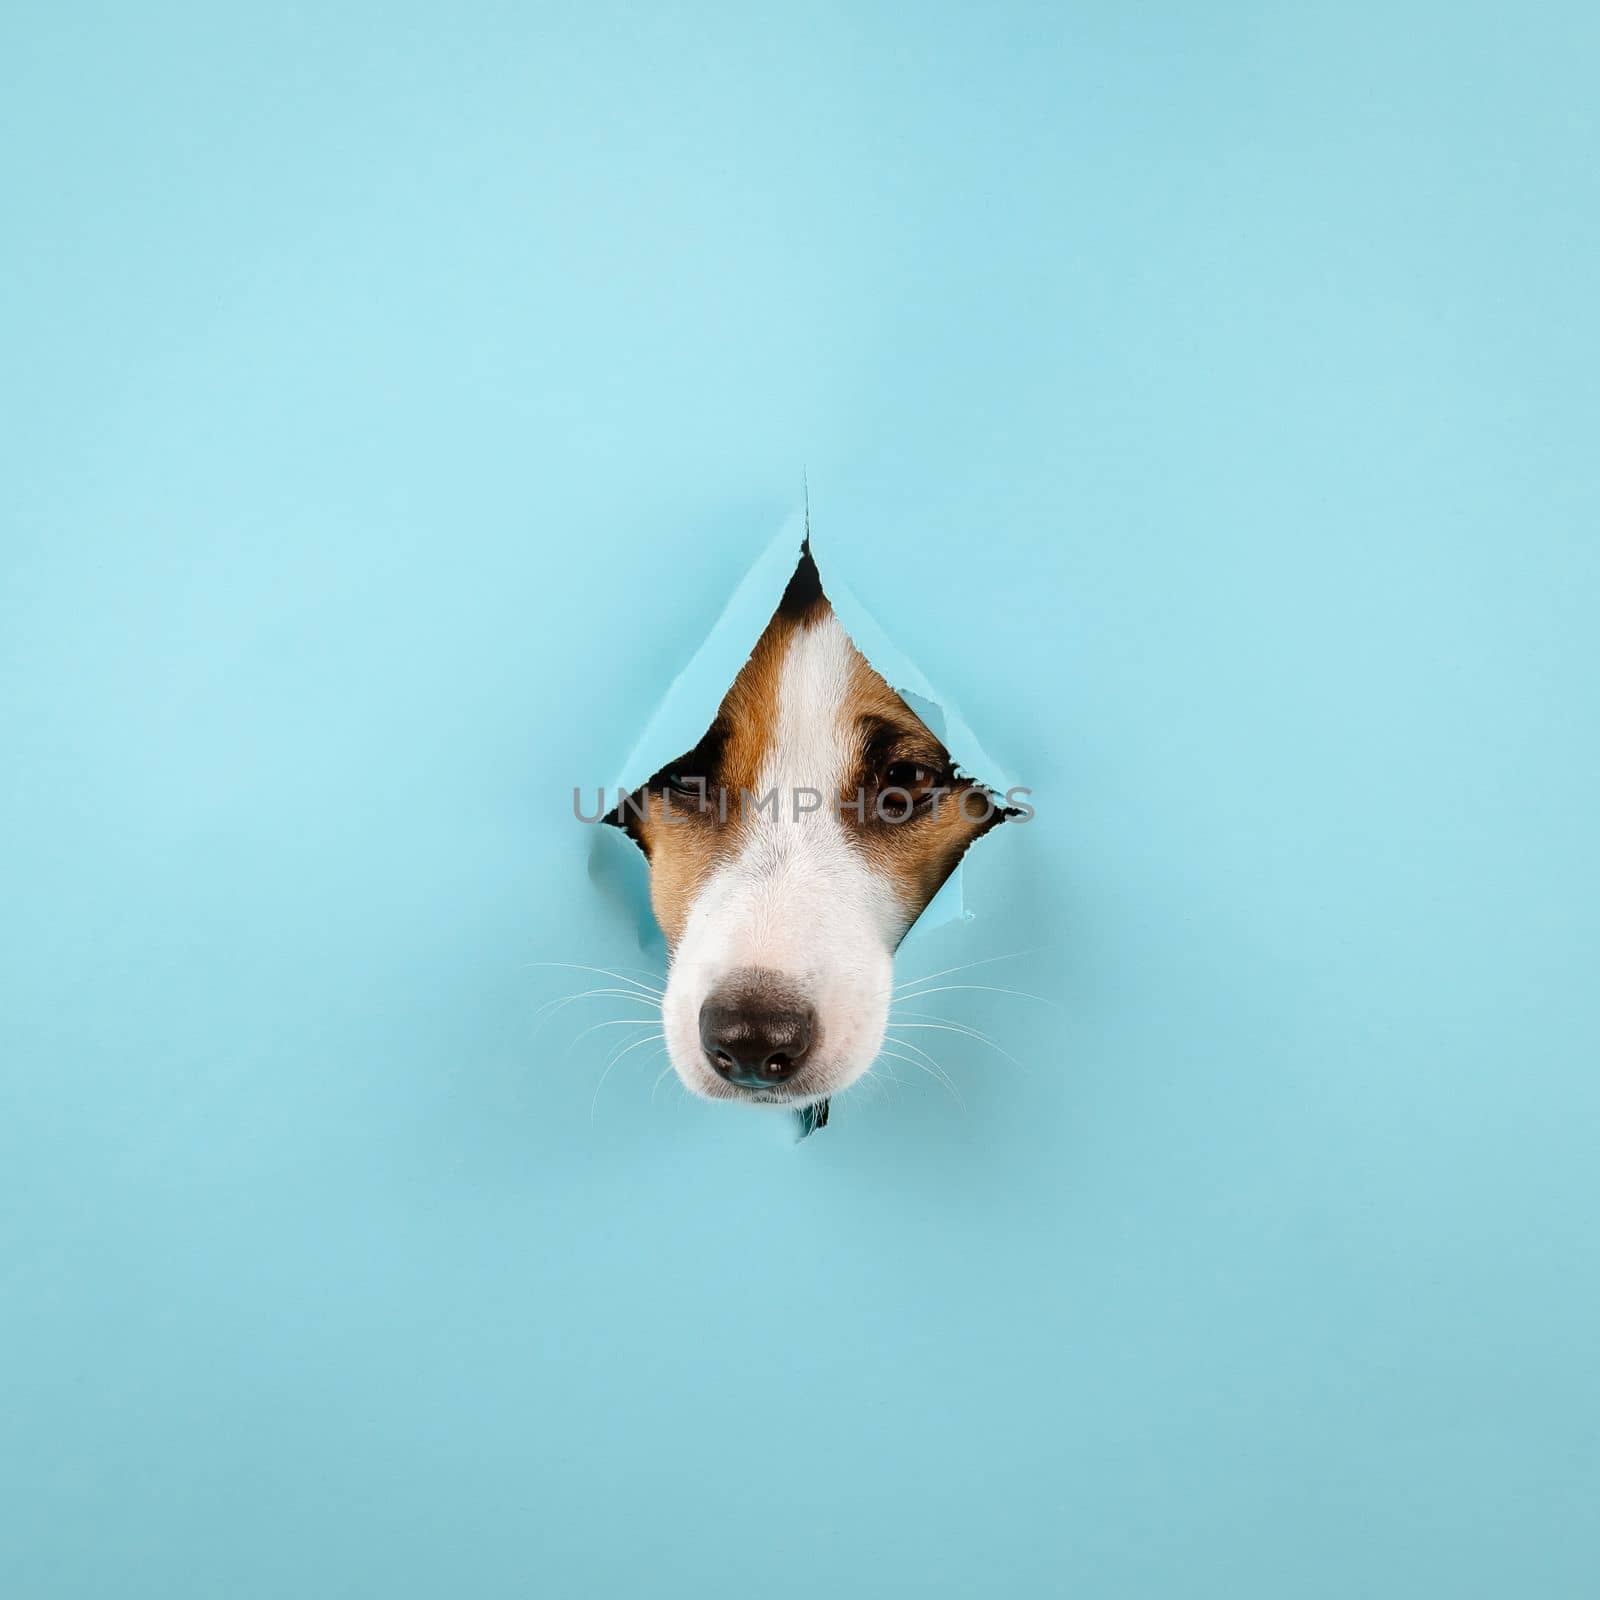 Dog nose from a hole in paper blue background. Copy space. by mrwed54